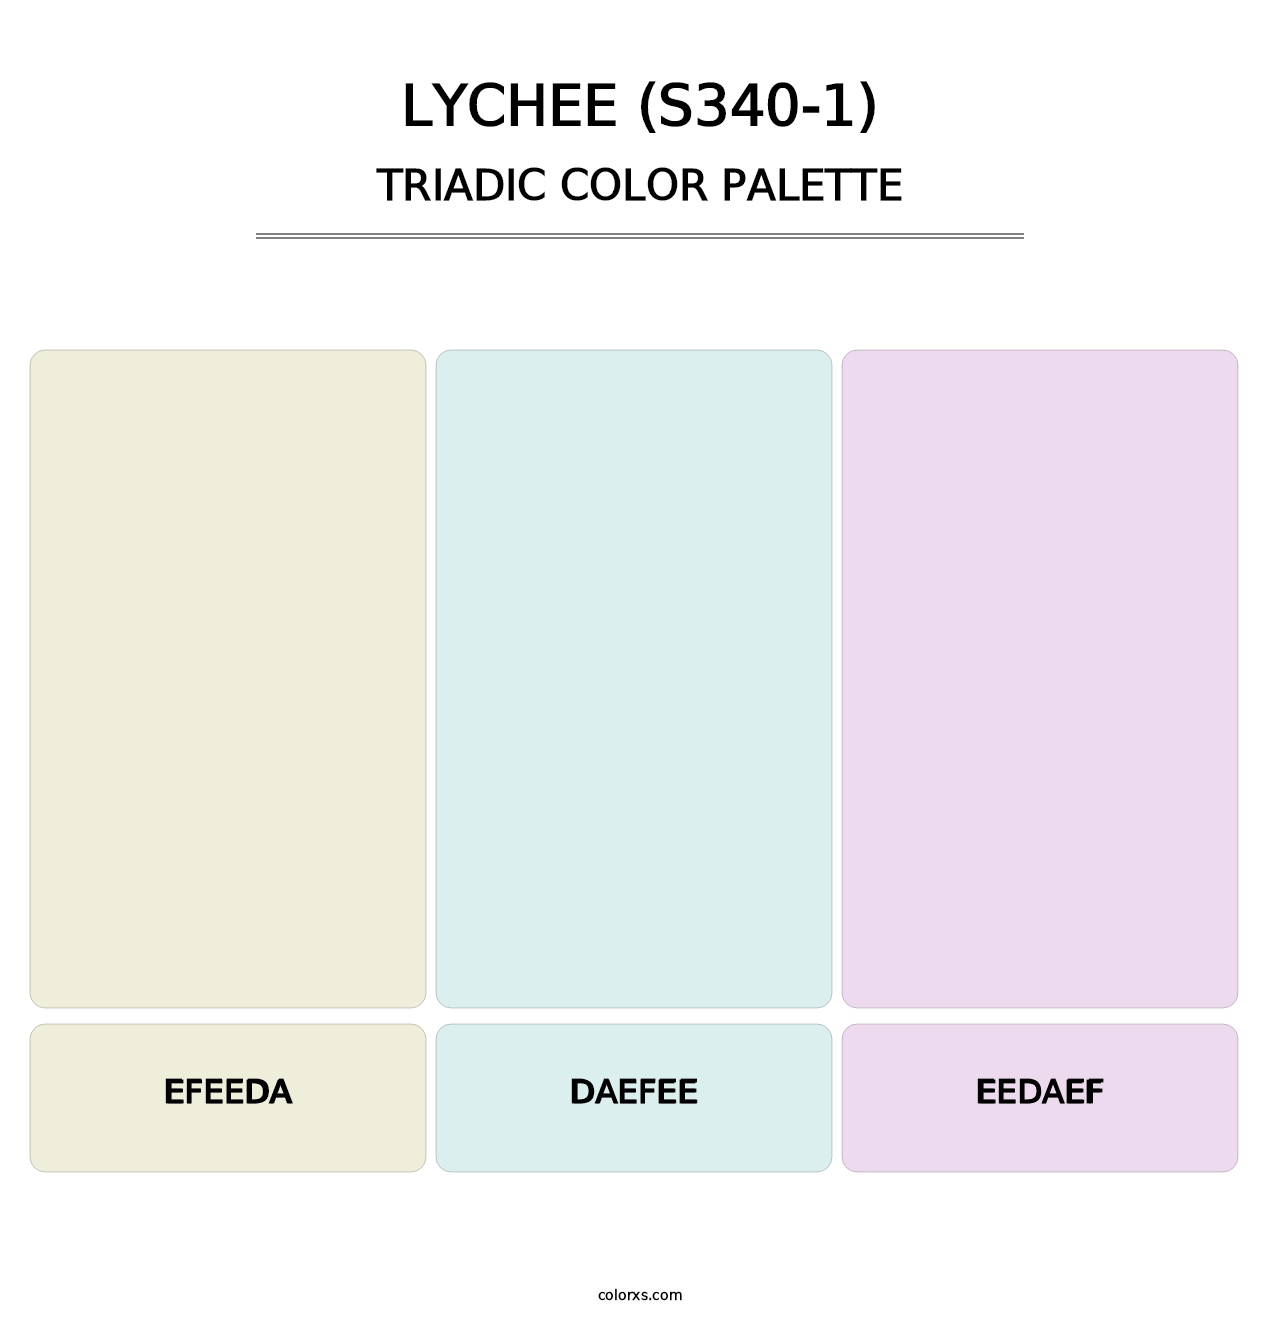 Lychee (S340-1) - Triadic Color Palette